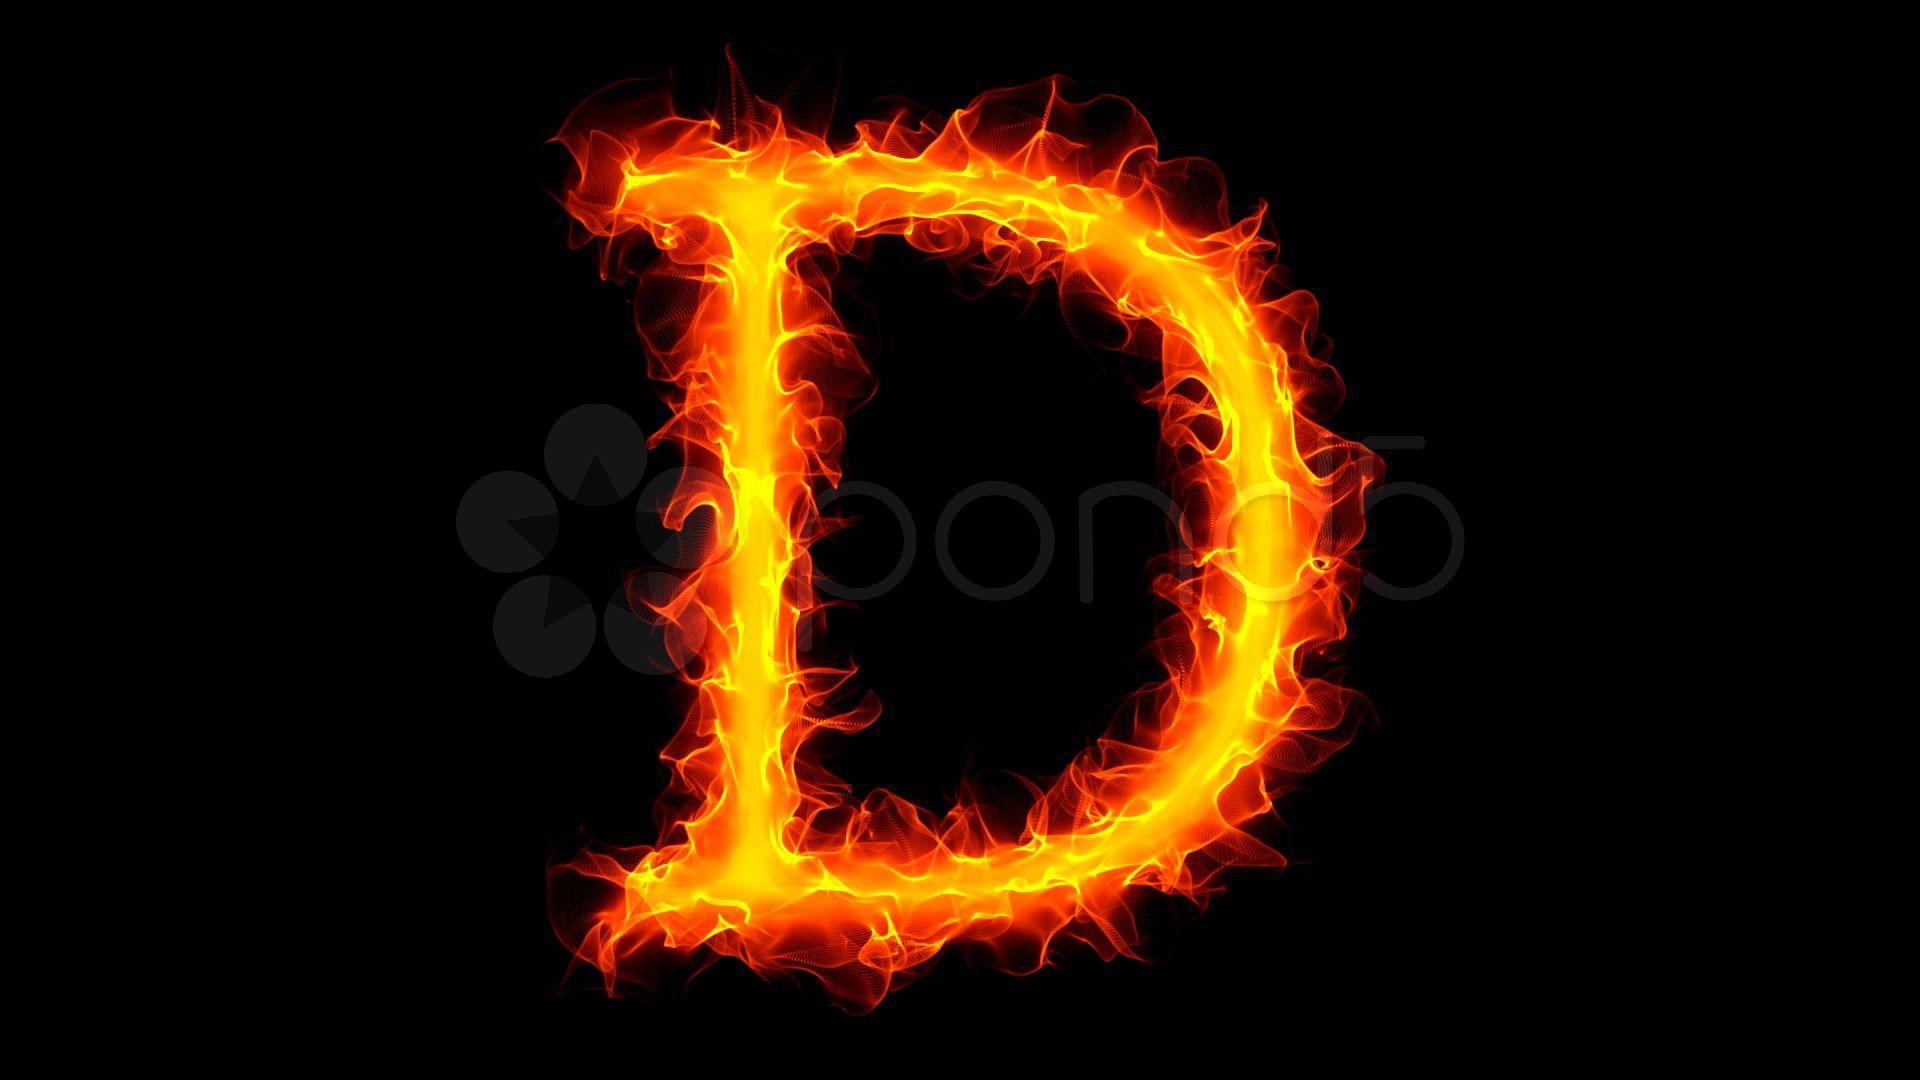 Letter D Wallpapers - Top Free Letter D Backgrounds - WallpaperAccess